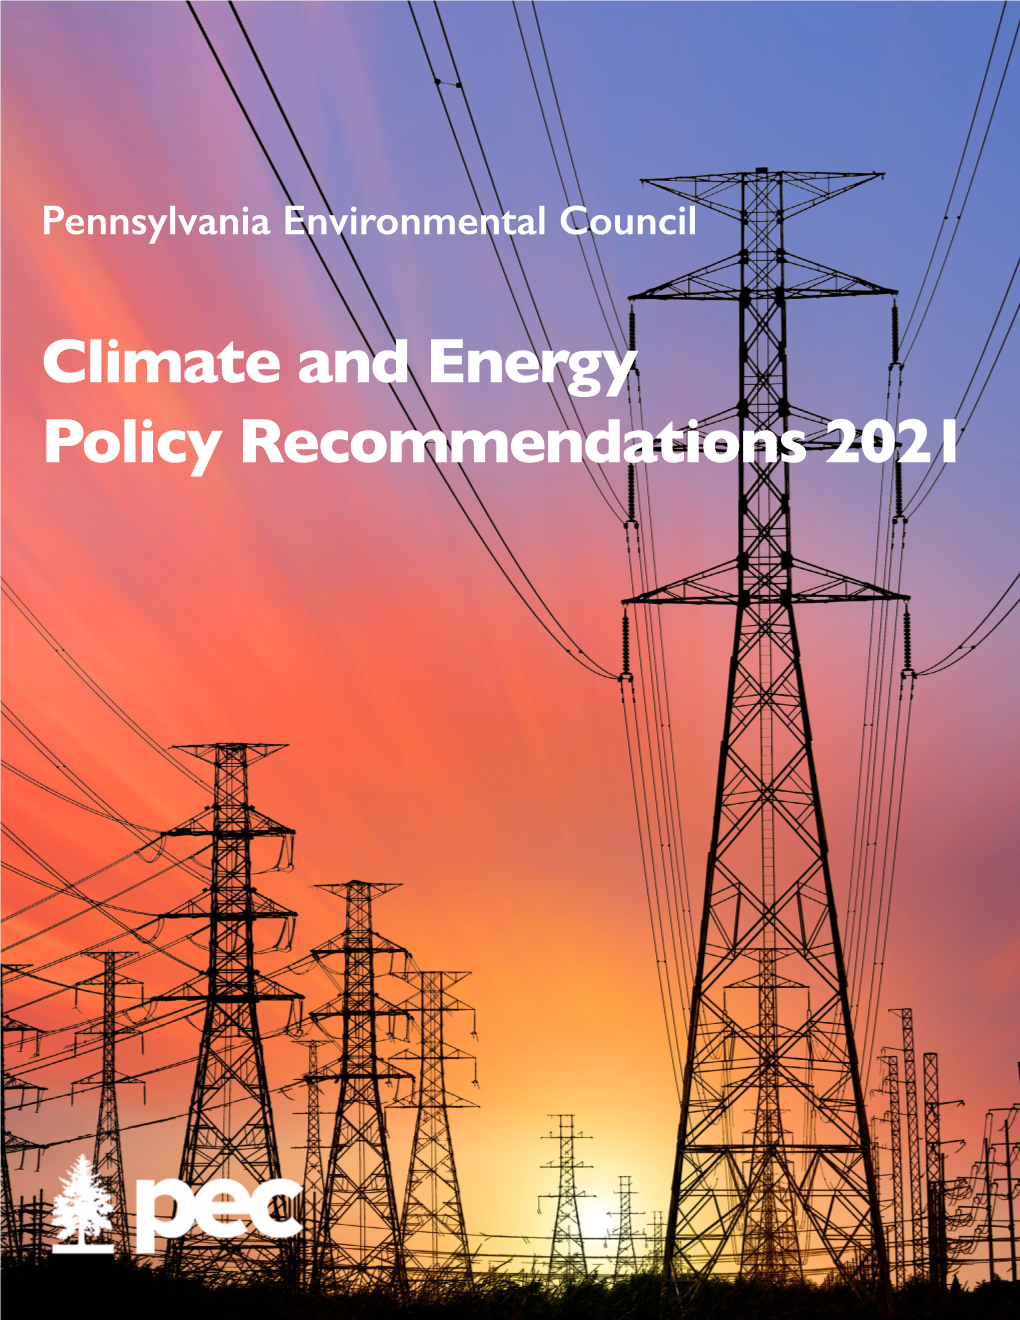 Climate and Energy Policy Recommendations 2021 Introduction